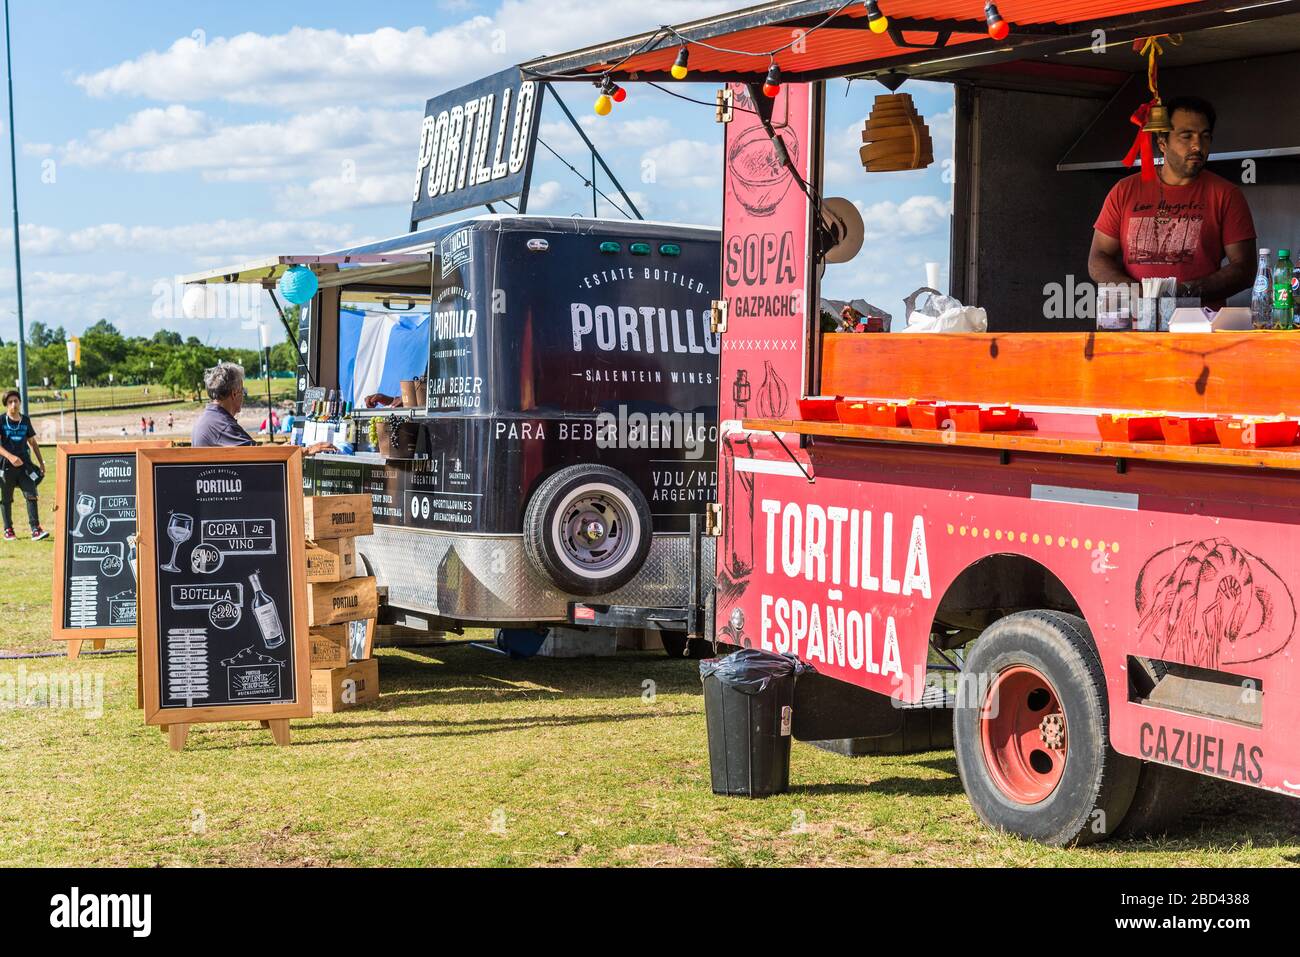 Vicente Lopez, Argentina - December 21, 2019: Food trucks and people Stock Photo